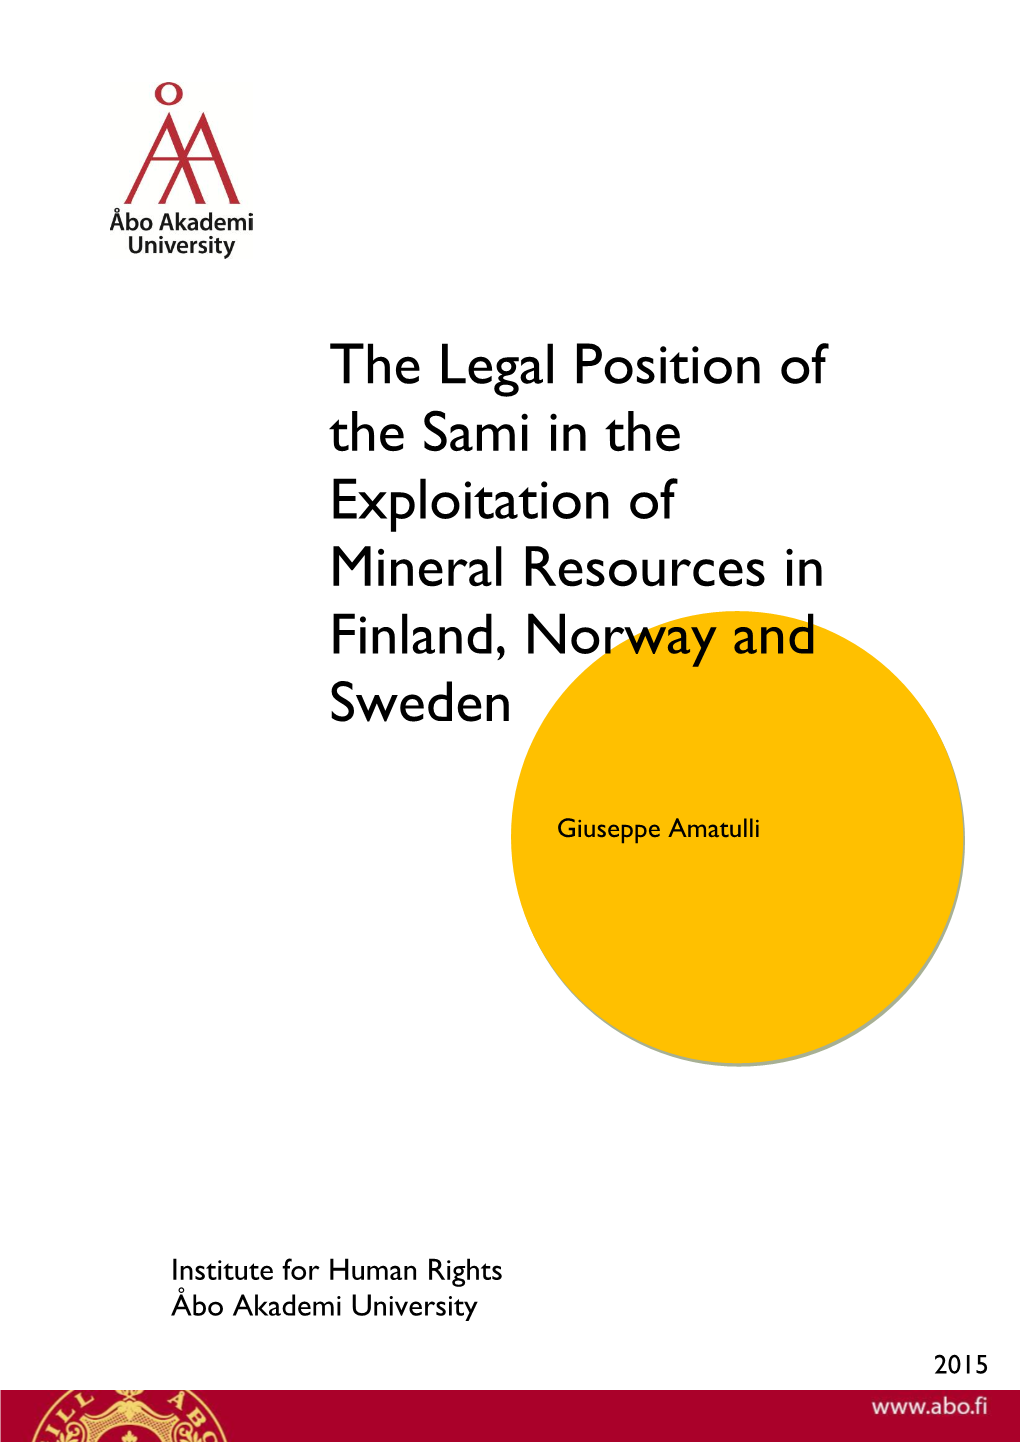 The Legal Position of the Sami in the Exploitation of Mineral Resources in Finland, Norway and Sweden